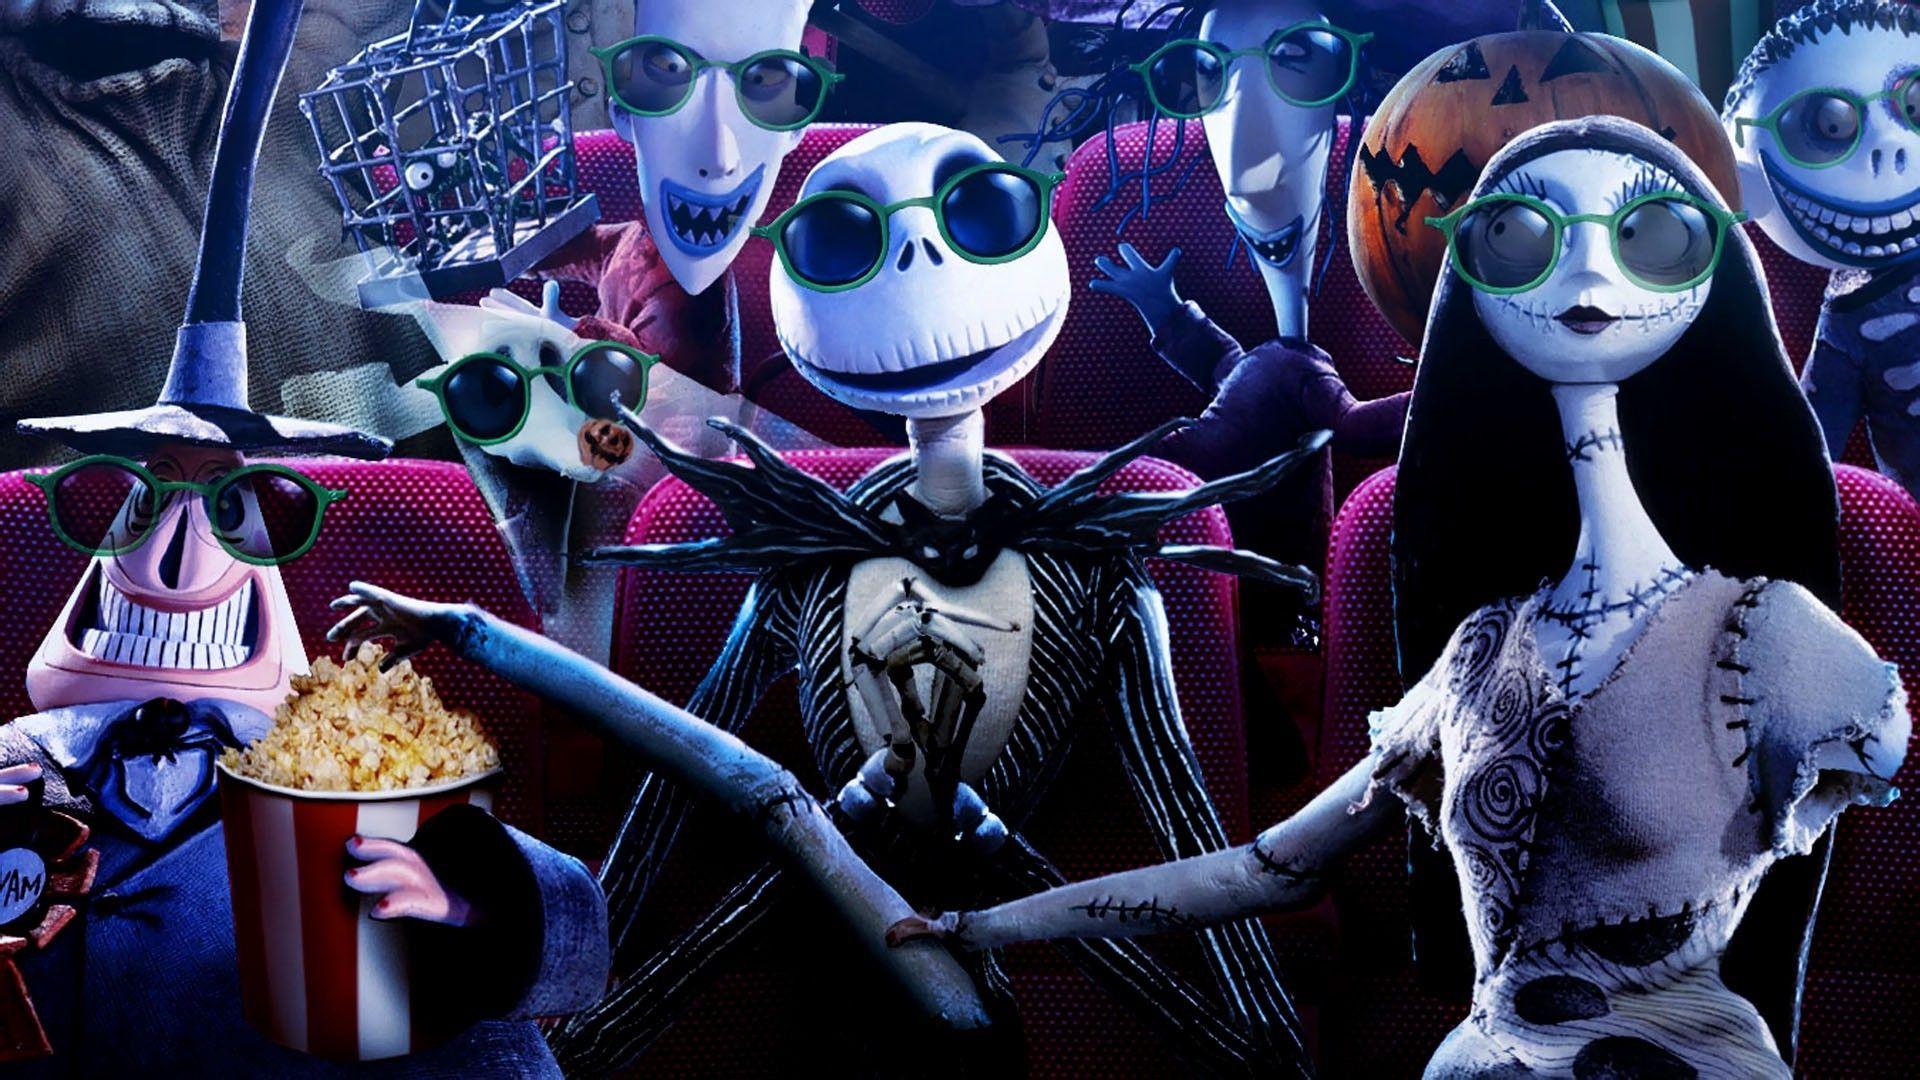 Nightmare Before Christmas Wallpaper 1920x1080 Image & Picture